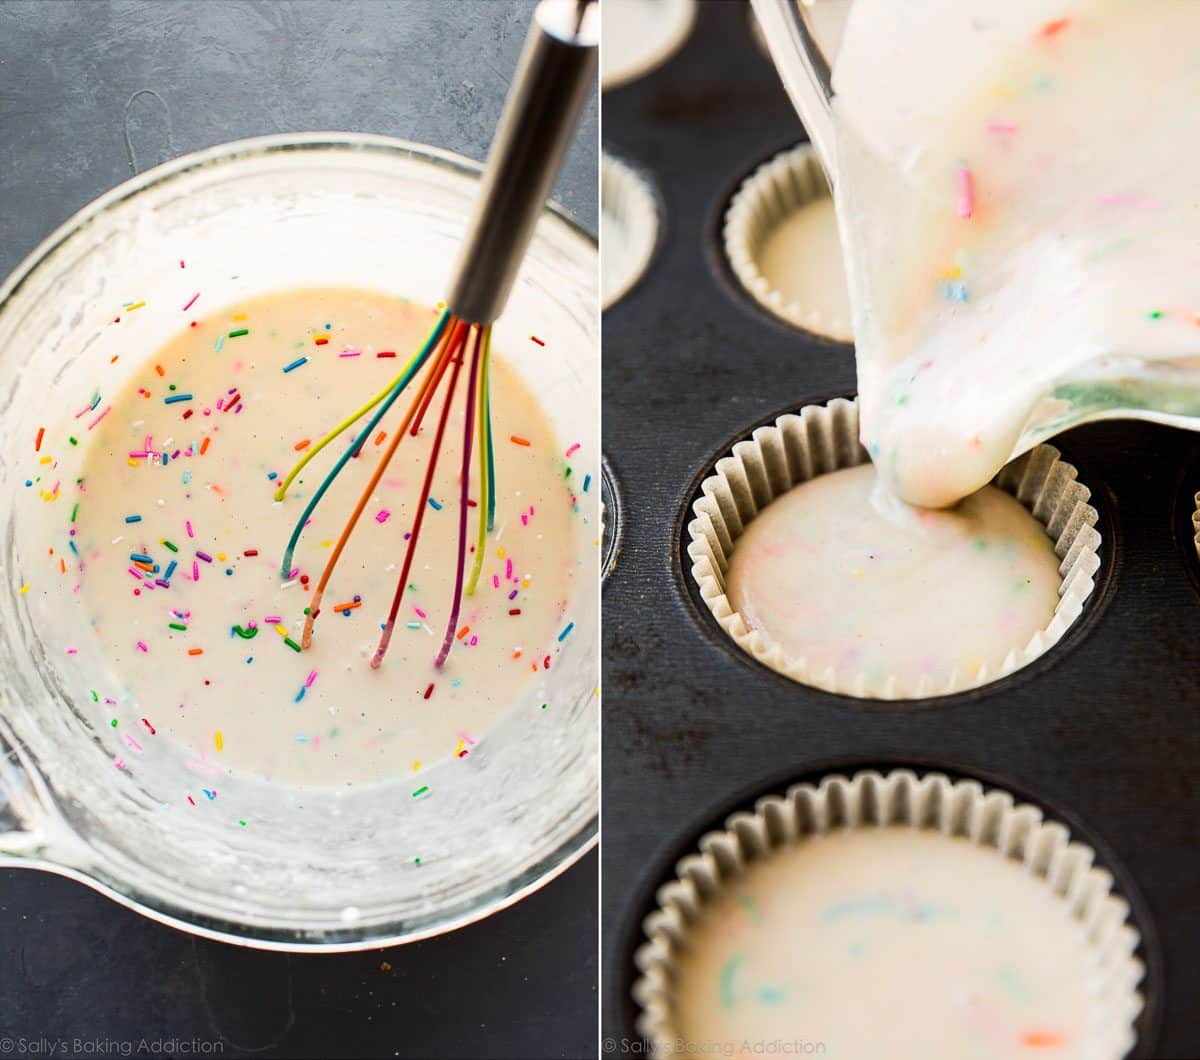 2 images of funfetti cupcake batter in a glass bowl and in a cupcake pan